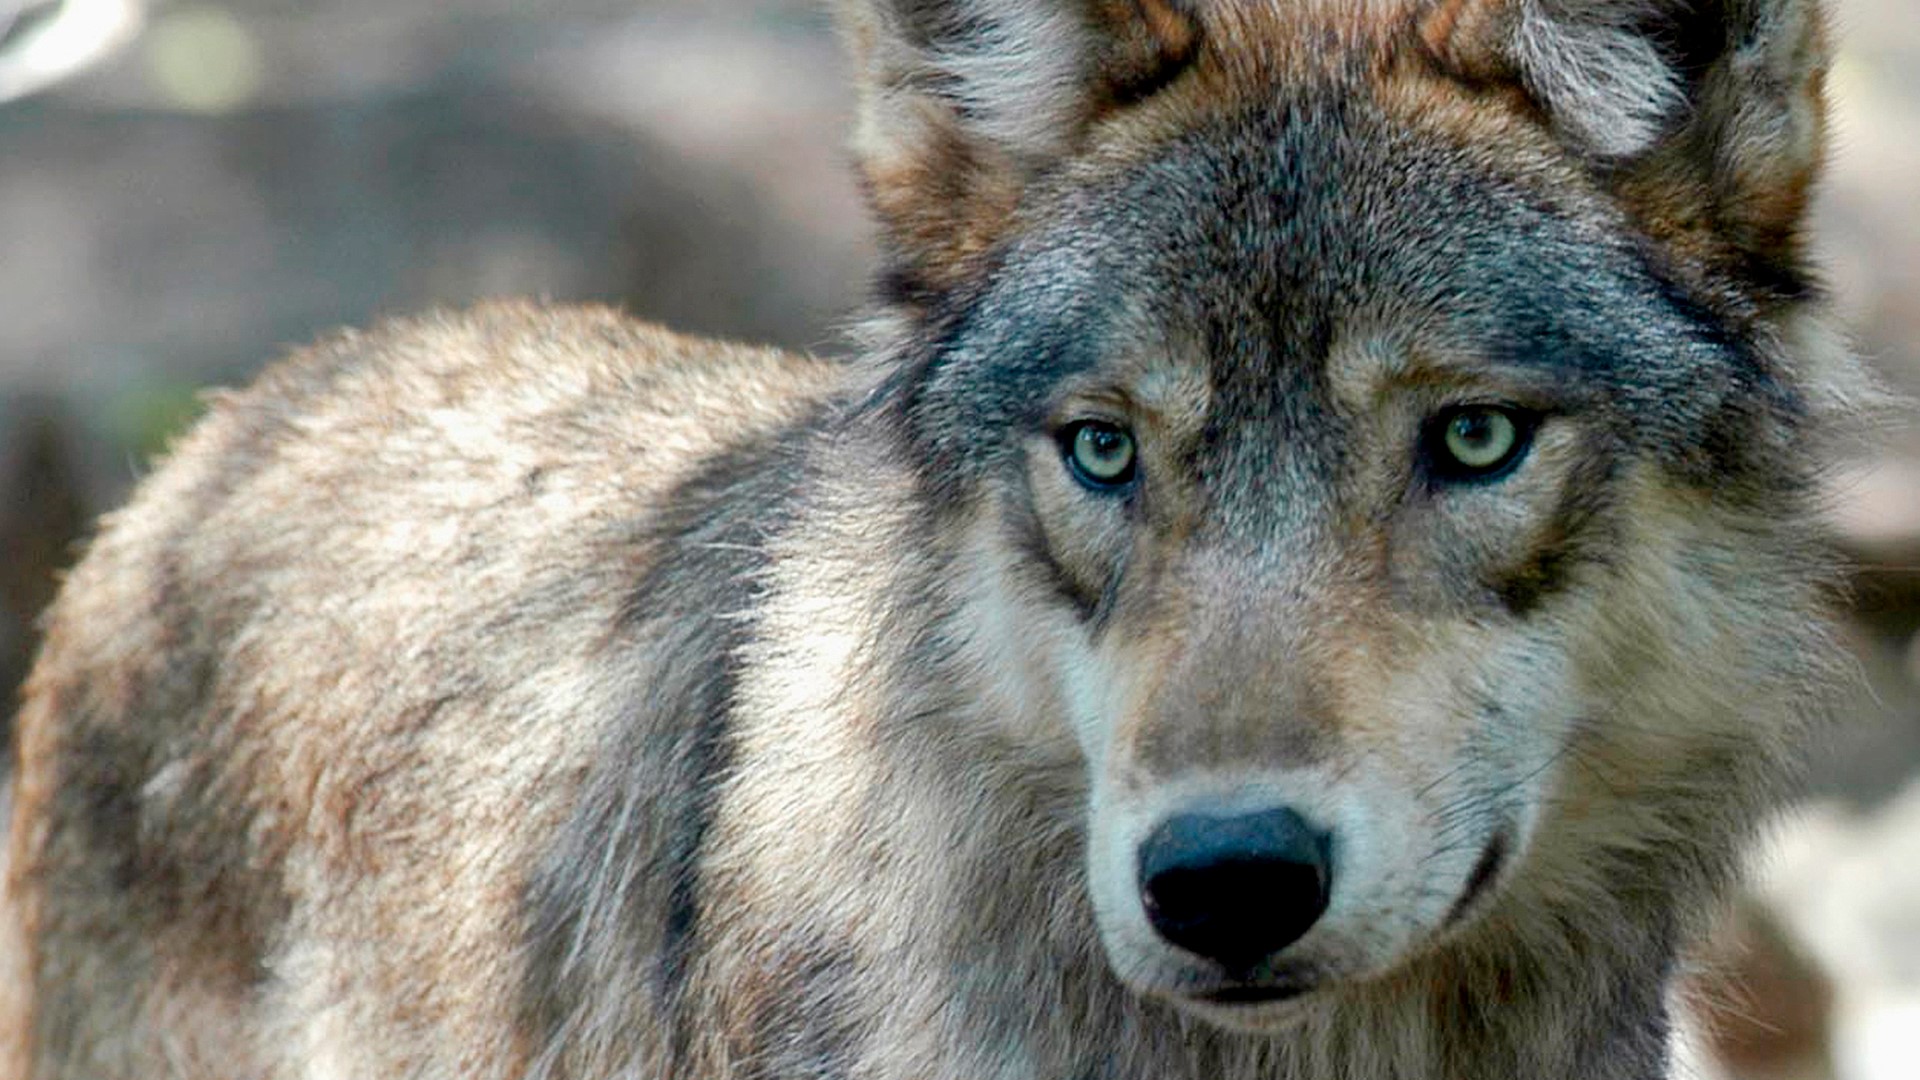 Lawmakers approve bill mandating limit on wolf population | kare11.com